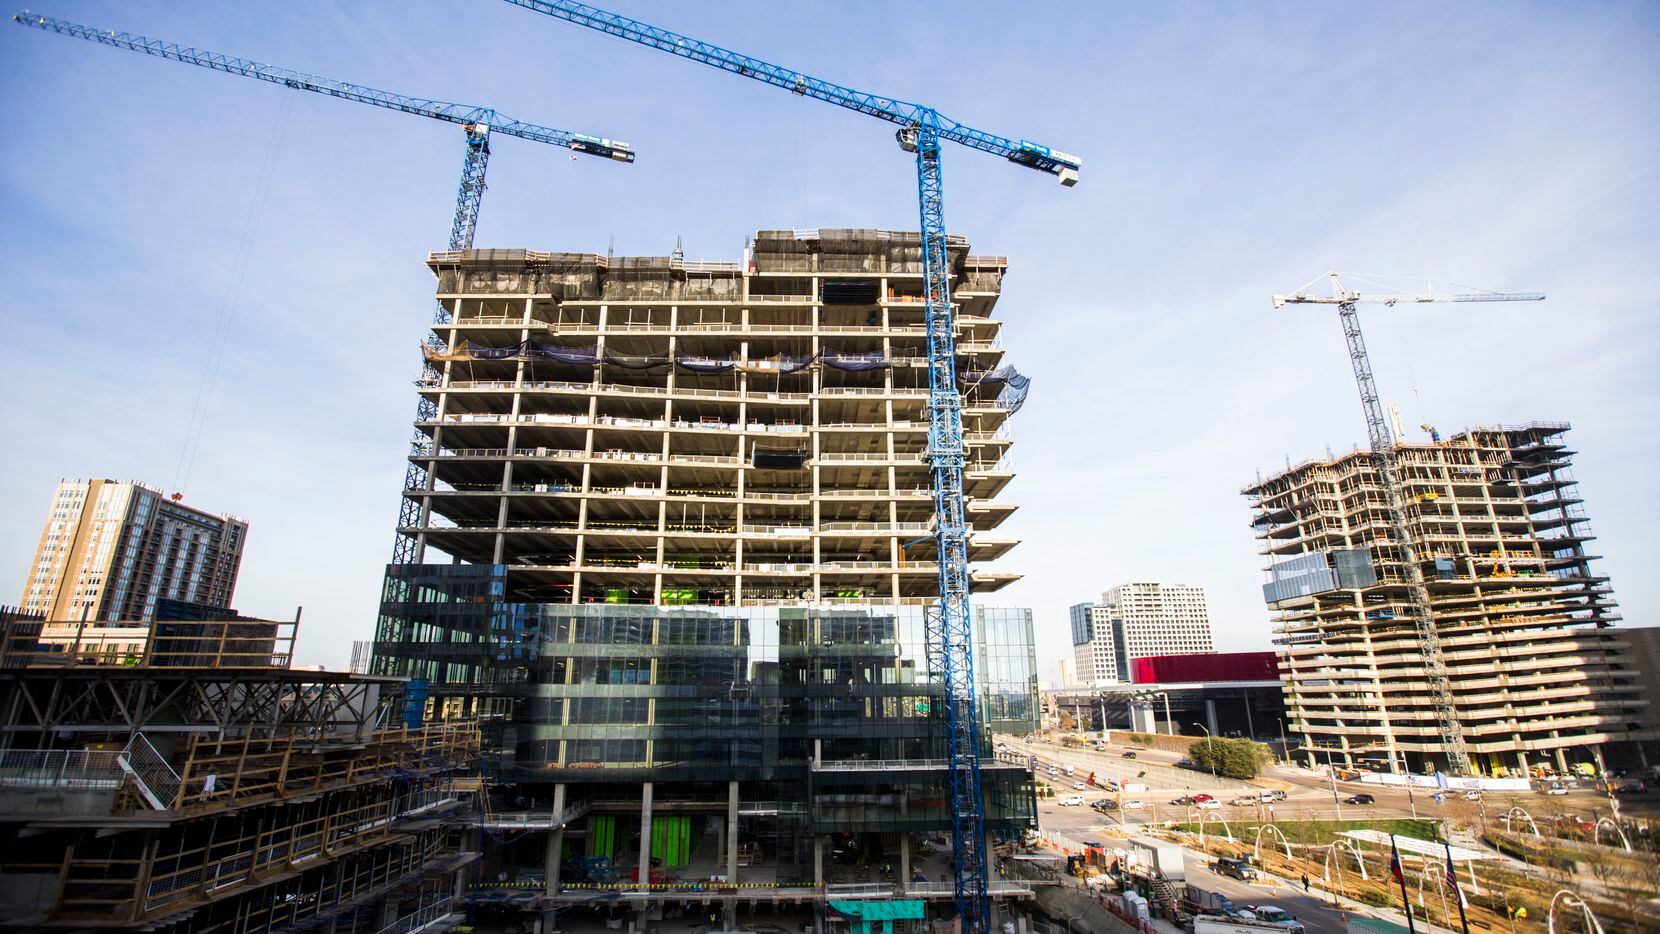 More than 6 million square feet of office space is being built in North Texas.